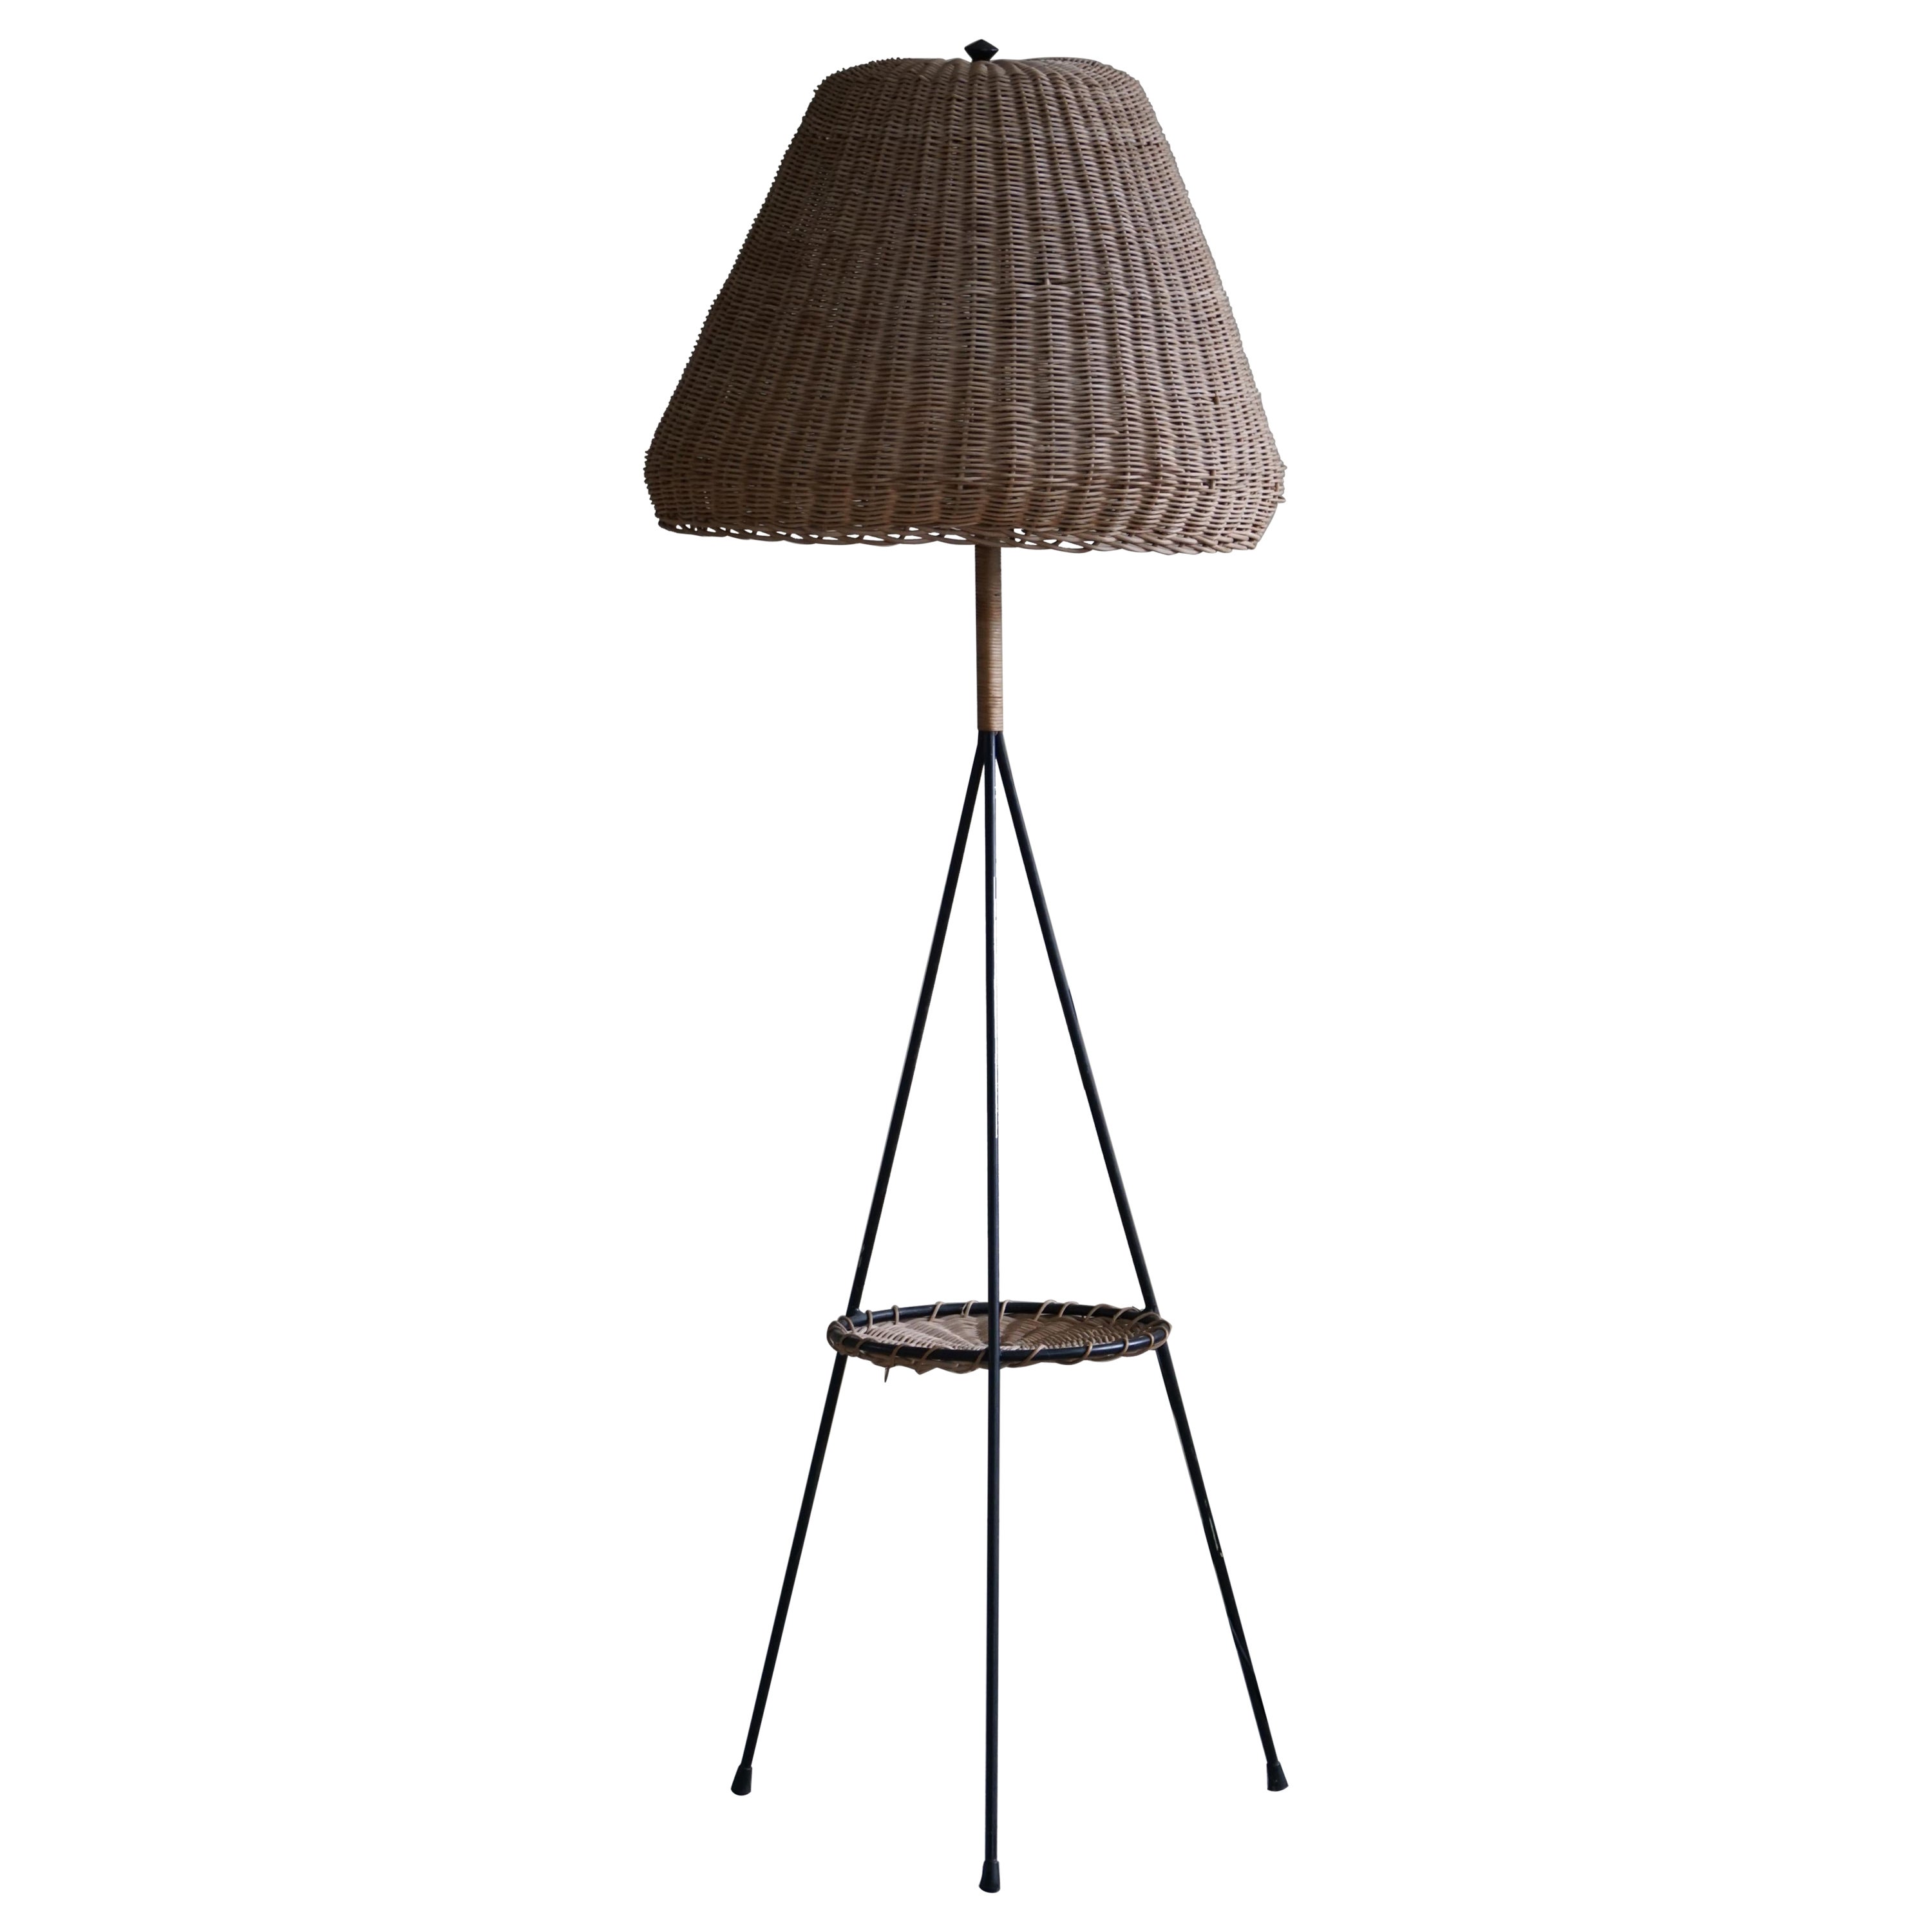 French Modern, Floor Lamp in Rattan and Steel, Mid Century, 1960s For Sale